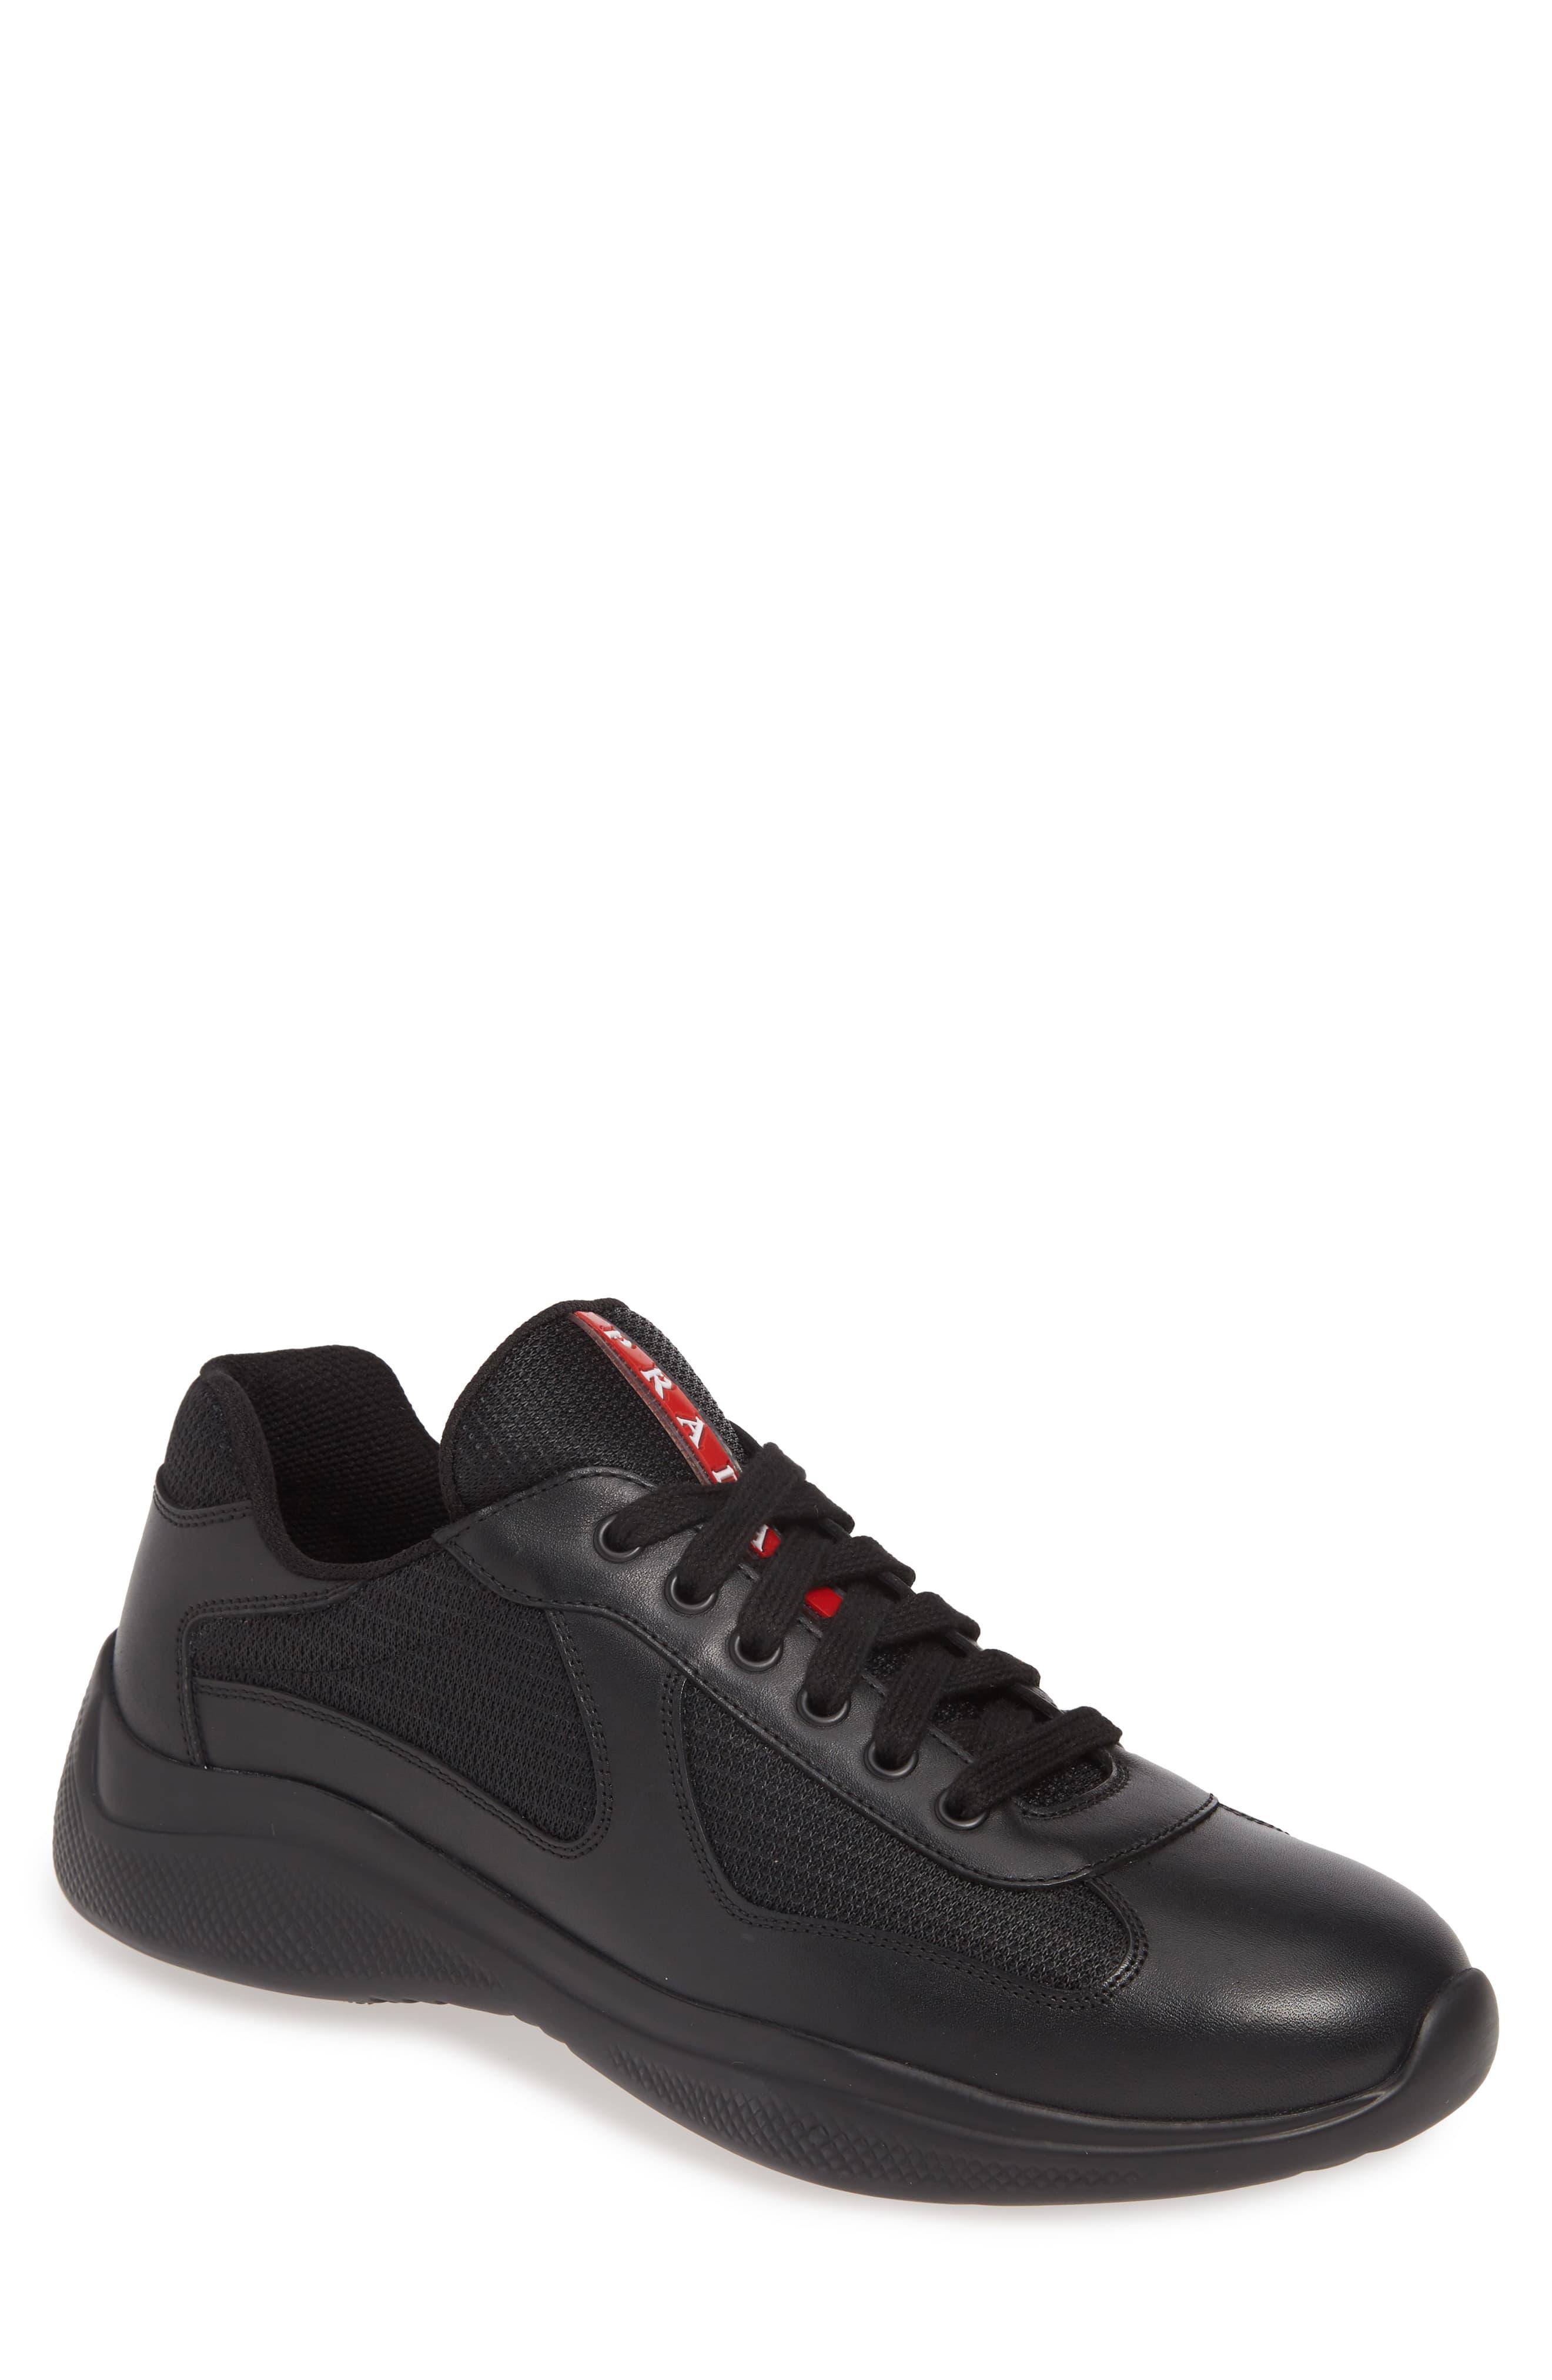 Prada America's Cup Patent Leather & Technical Fabric Sneakers in Nero ...